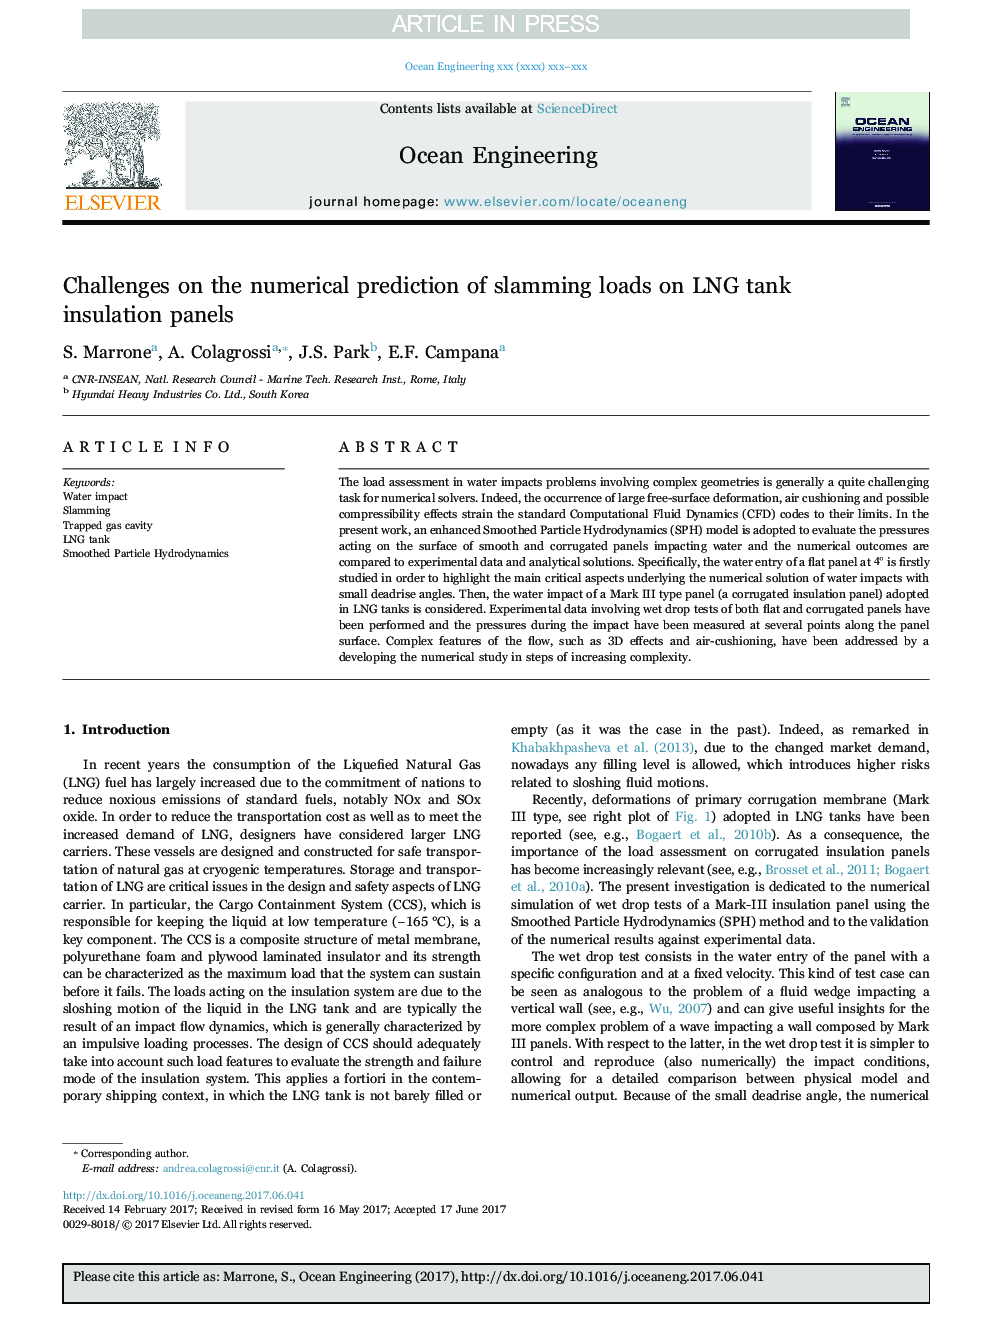 Challenges on the numerical prediction of slamming loads on LNG tank insulation panels